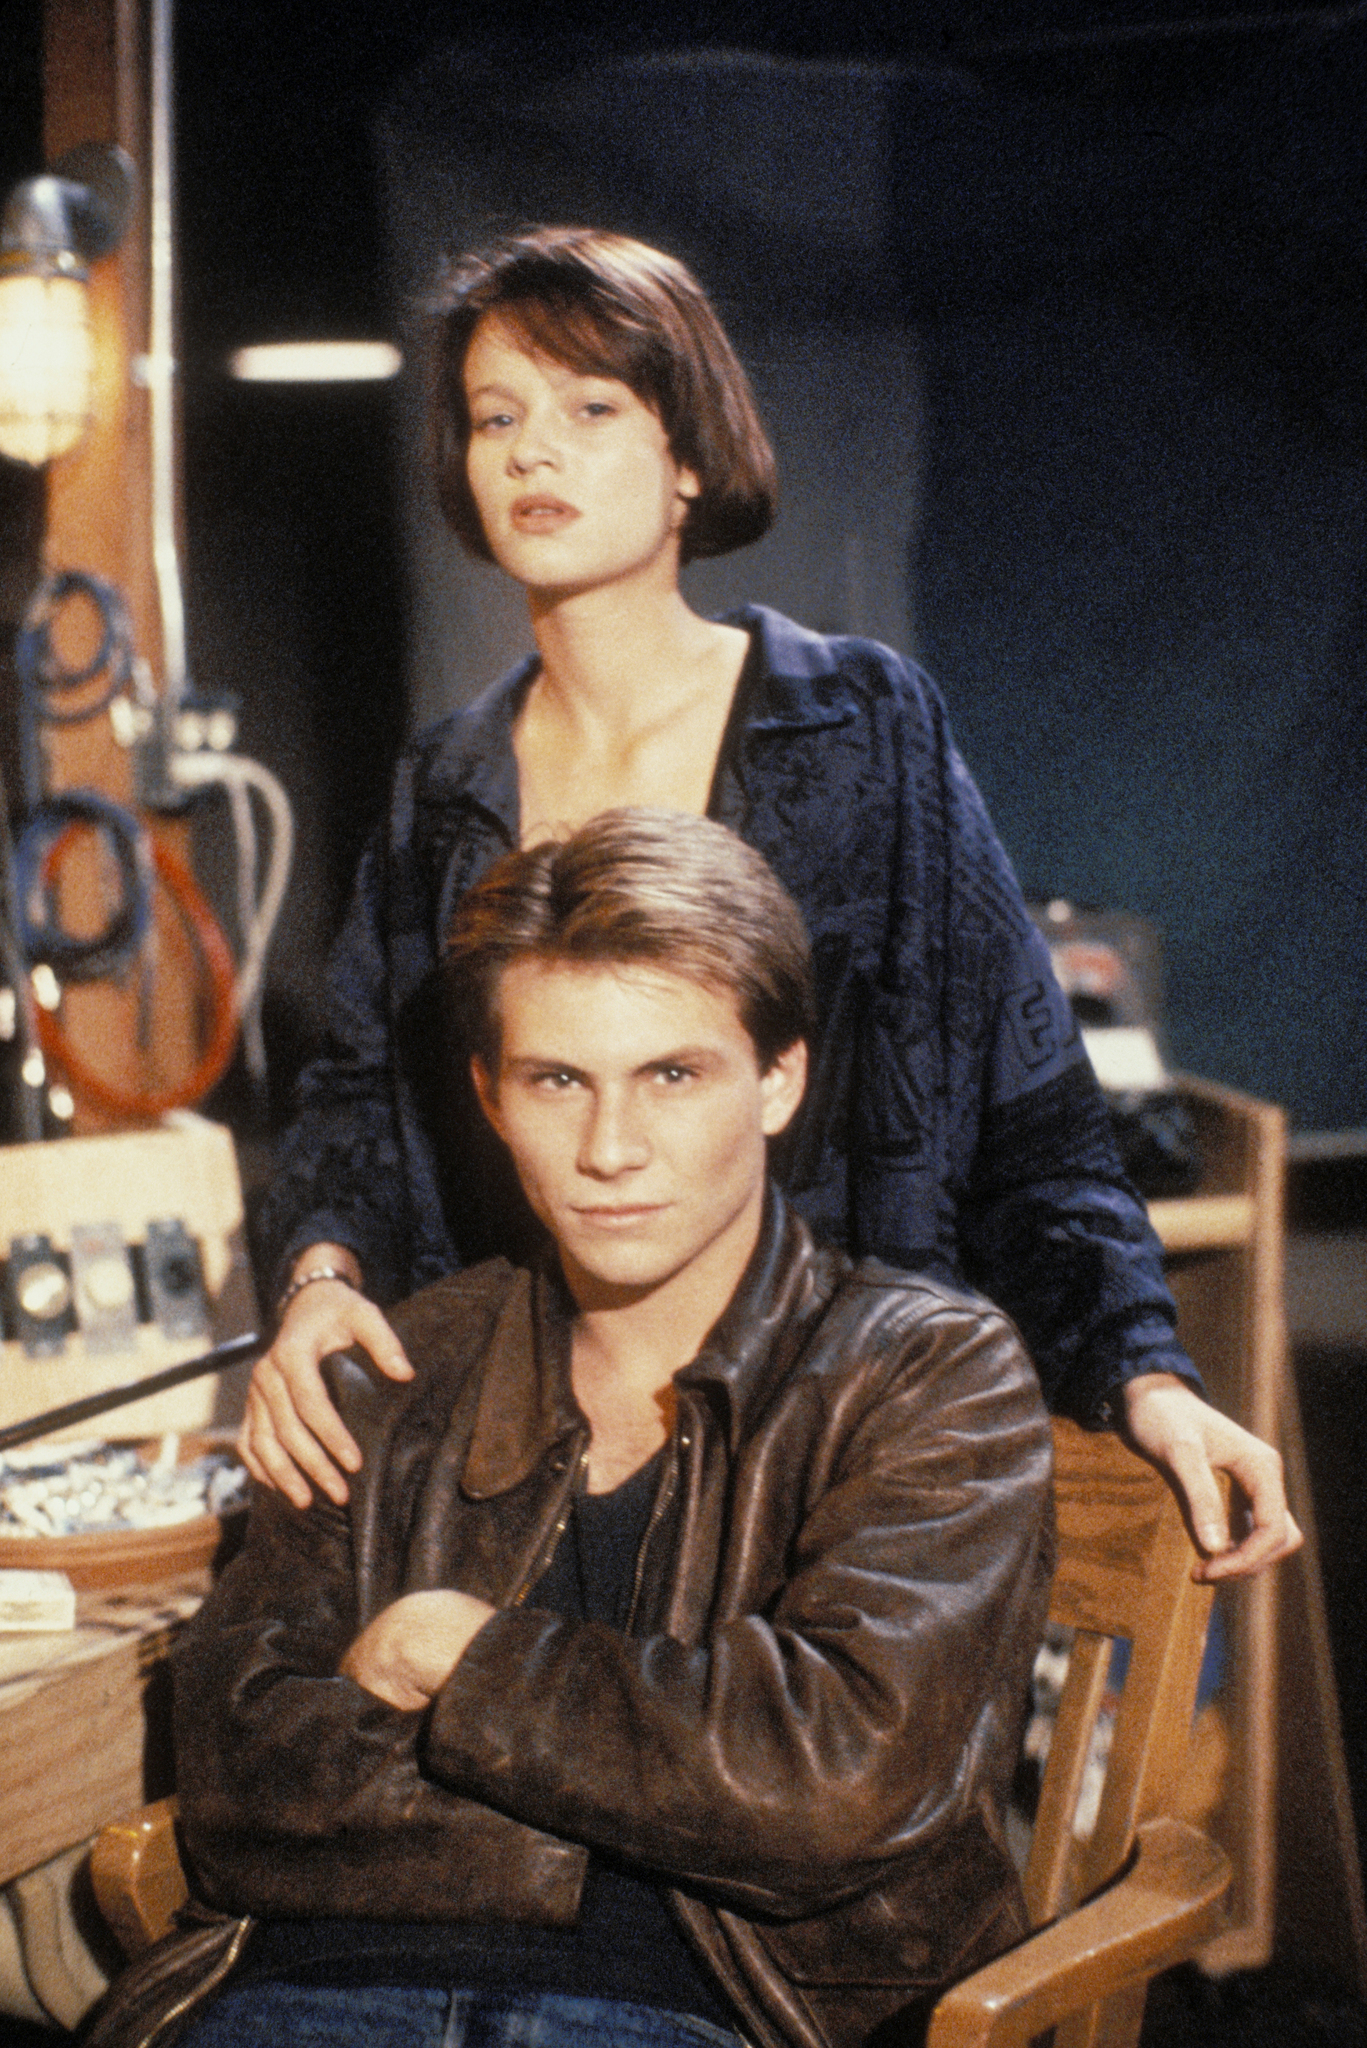 Still of Christian Slater and Samantha Mathis in Pump Up the Volume (1990)